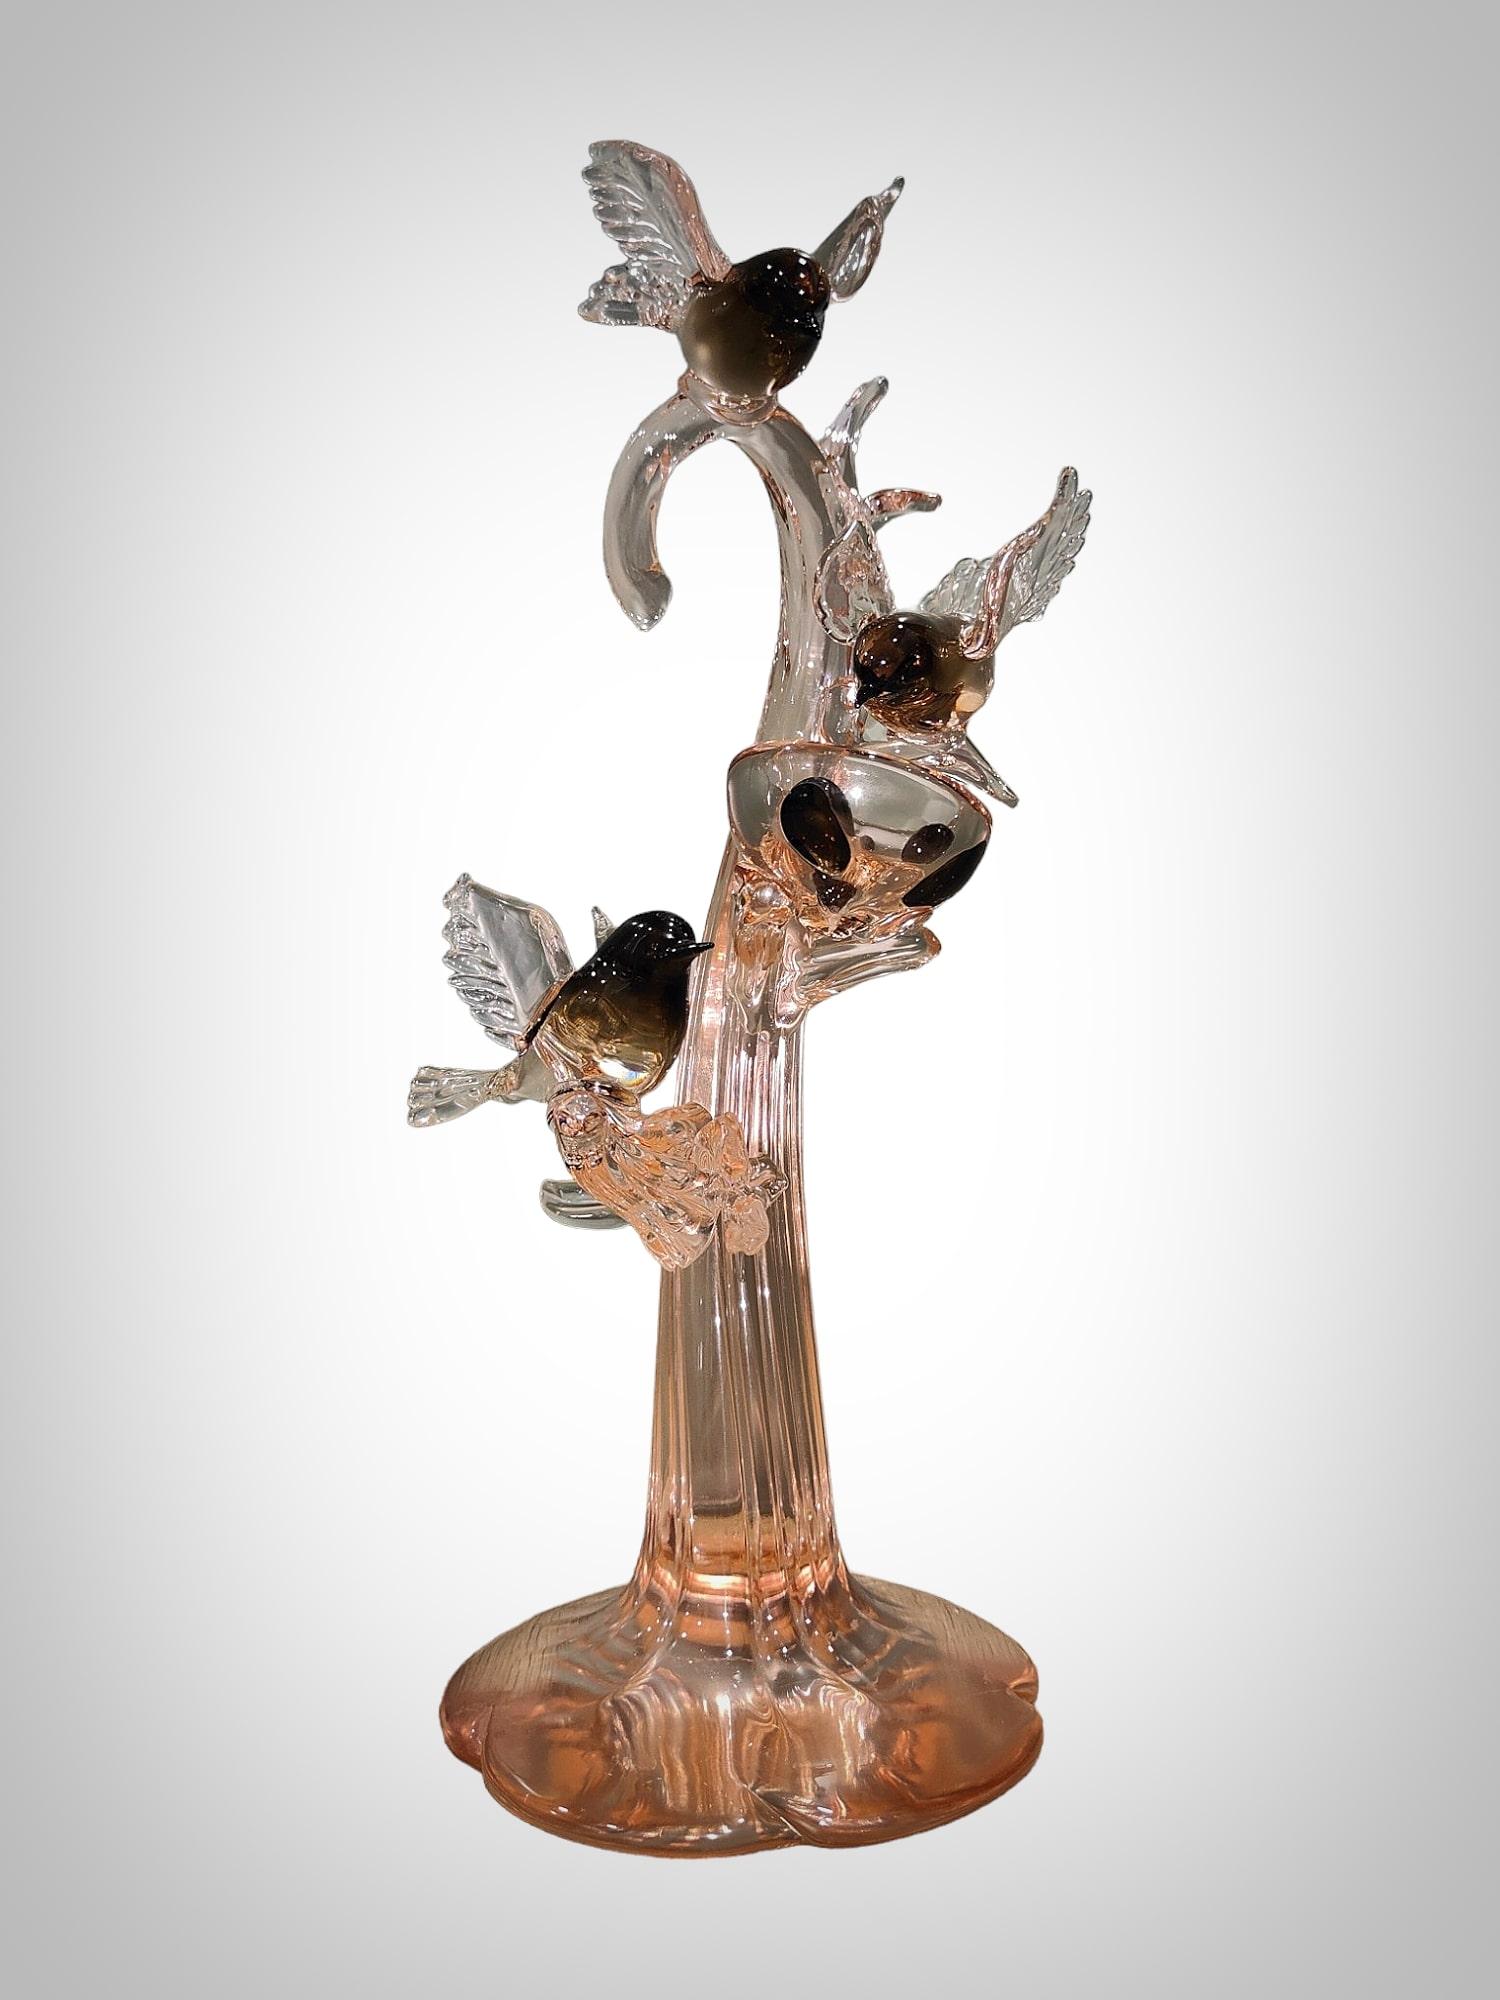 We present an exceptional Murano glass sculpture signed by the renowned artist Pino Signoretto. This elegant work of art captures the essence of Murano glass and depicts a charming tree with birds, a distinctive piece from the 70s that reflects the